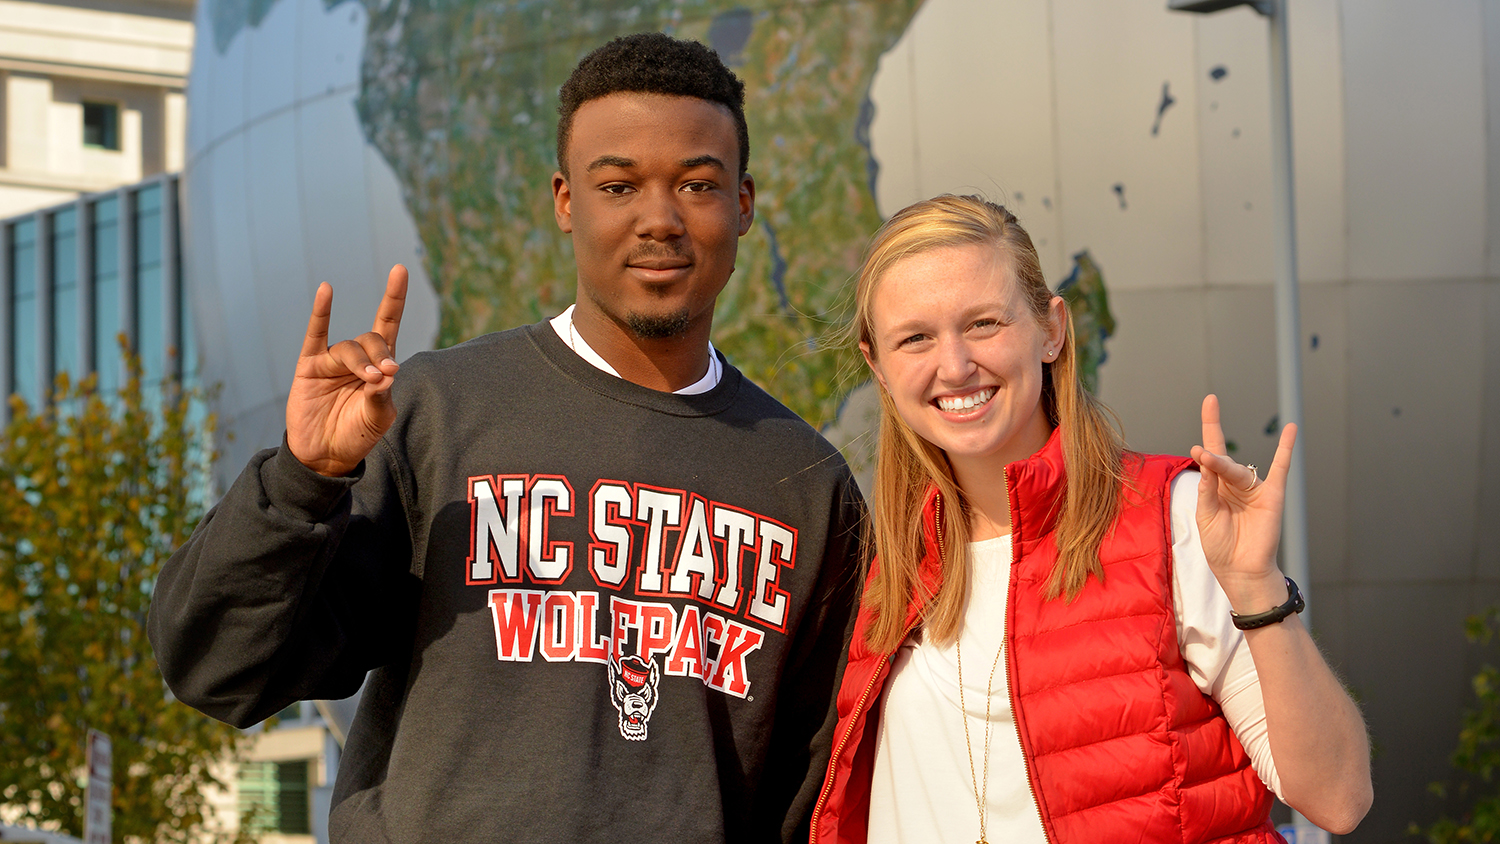 Students giving the Wolfpack sign on campus.